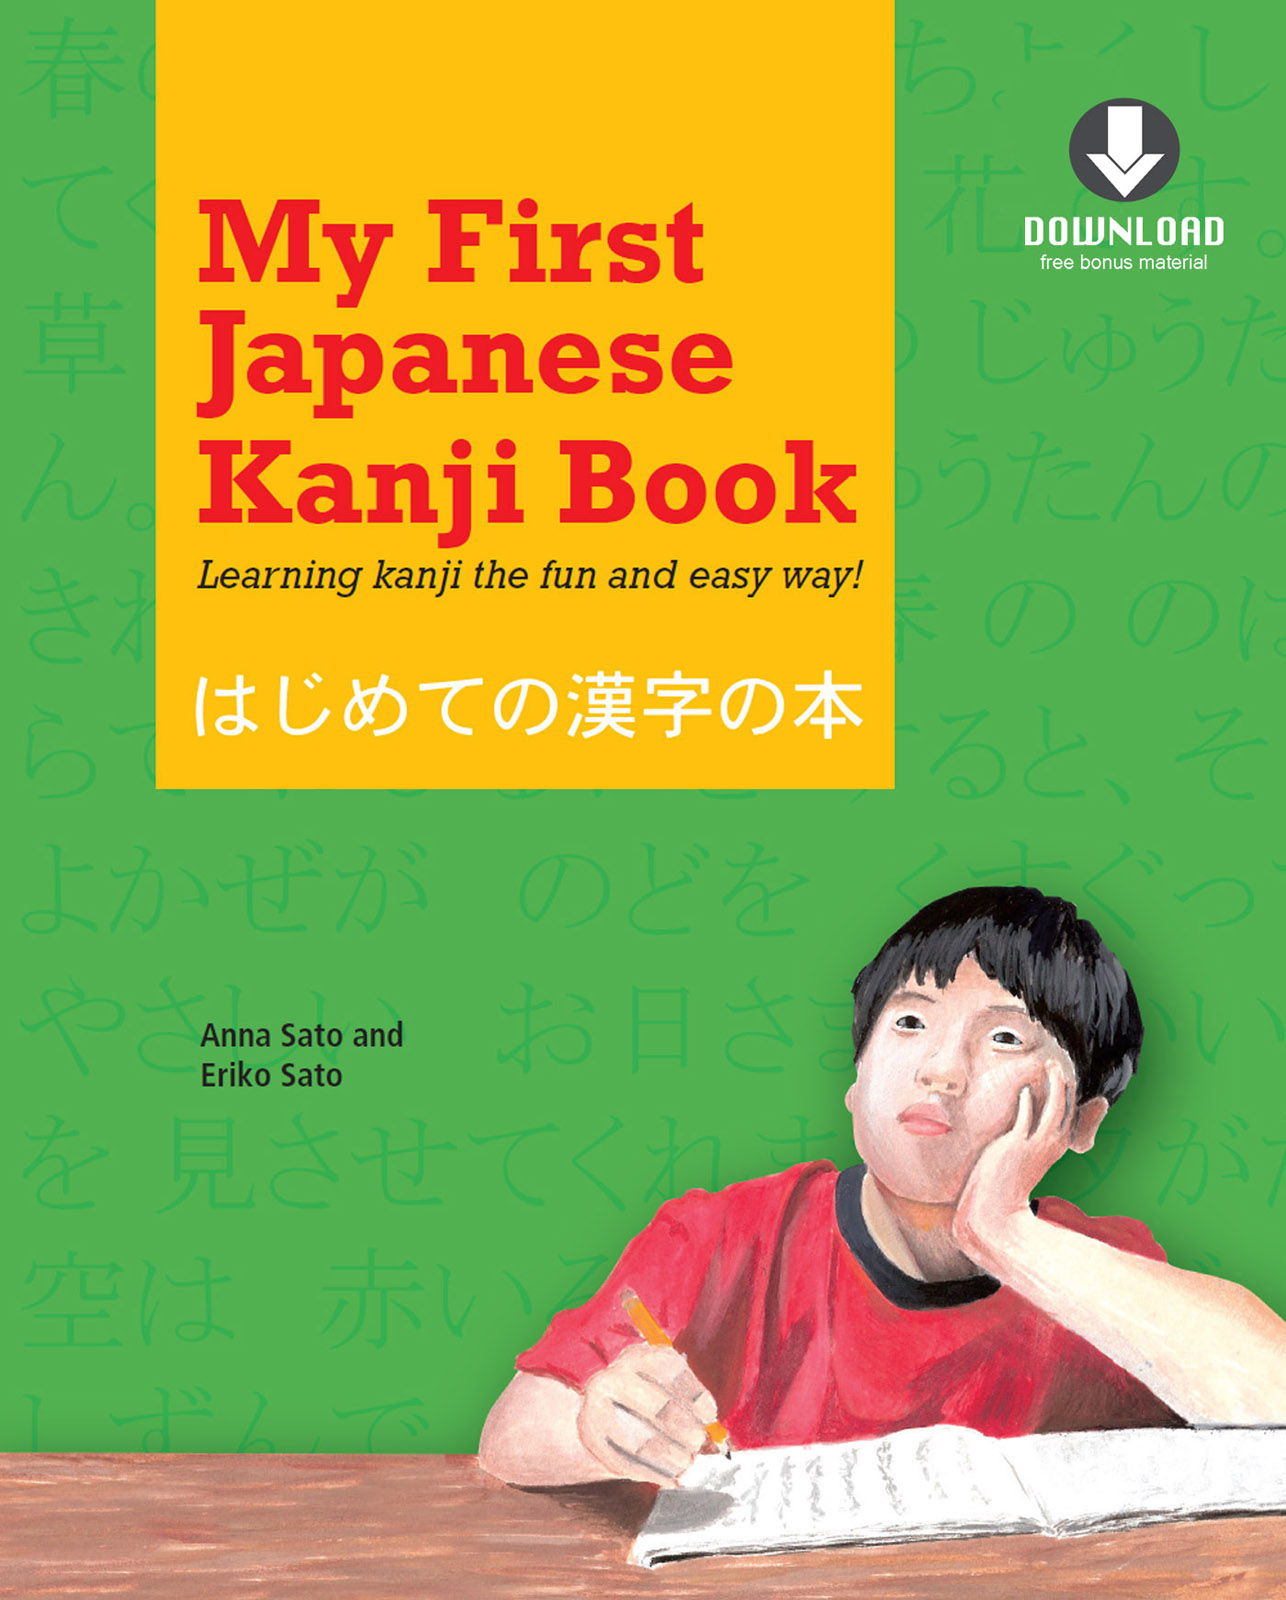 My First Japanese Kanji Book Learning kanji the fun and easy way Downloadable MP3 Audio Included - photo 2